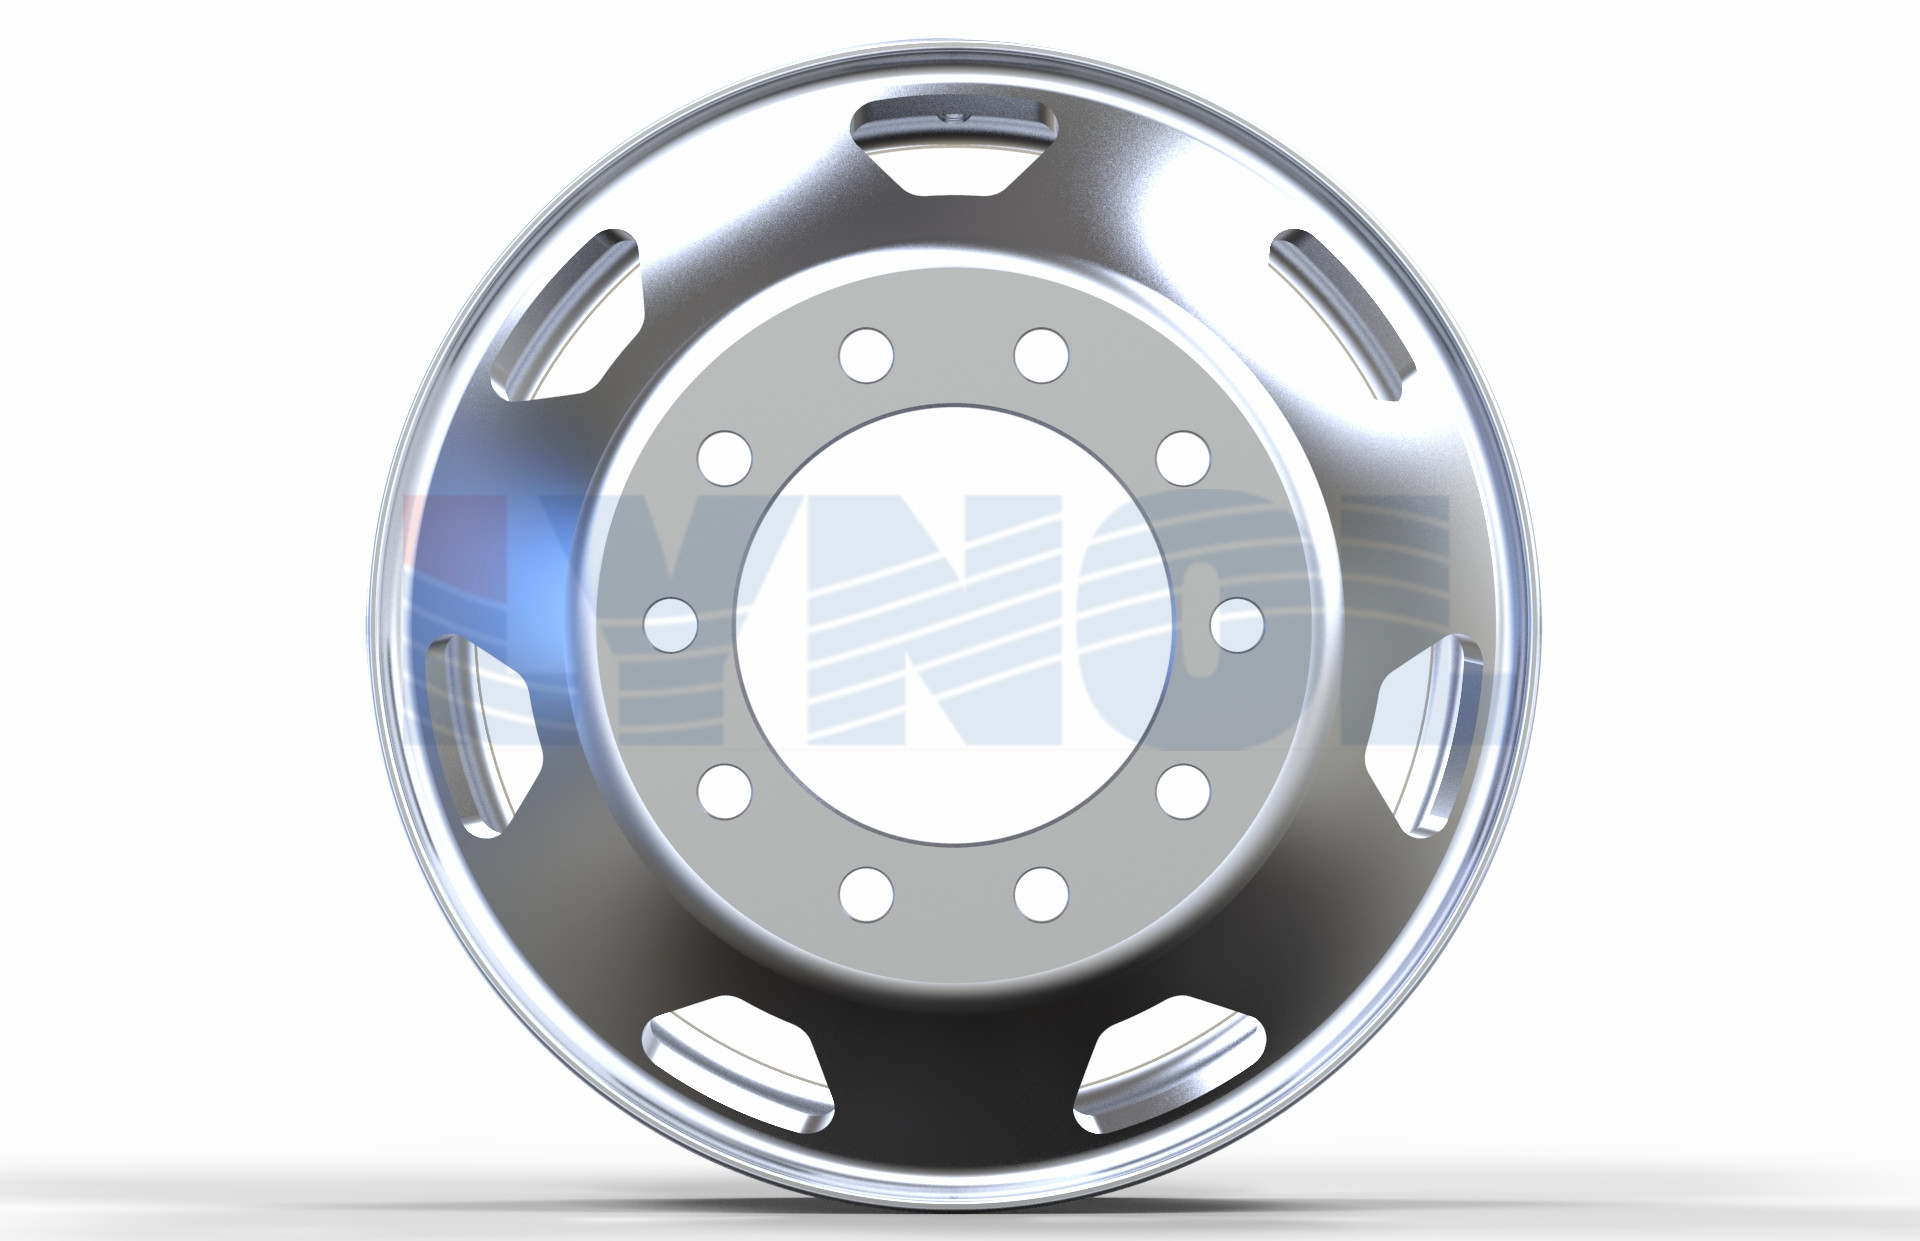 2800-005 - WHEEL - Truck Wheel 22.5X8.25 15 DC Hub   Piloted Both Sides Polished 6061-T6 D-Style